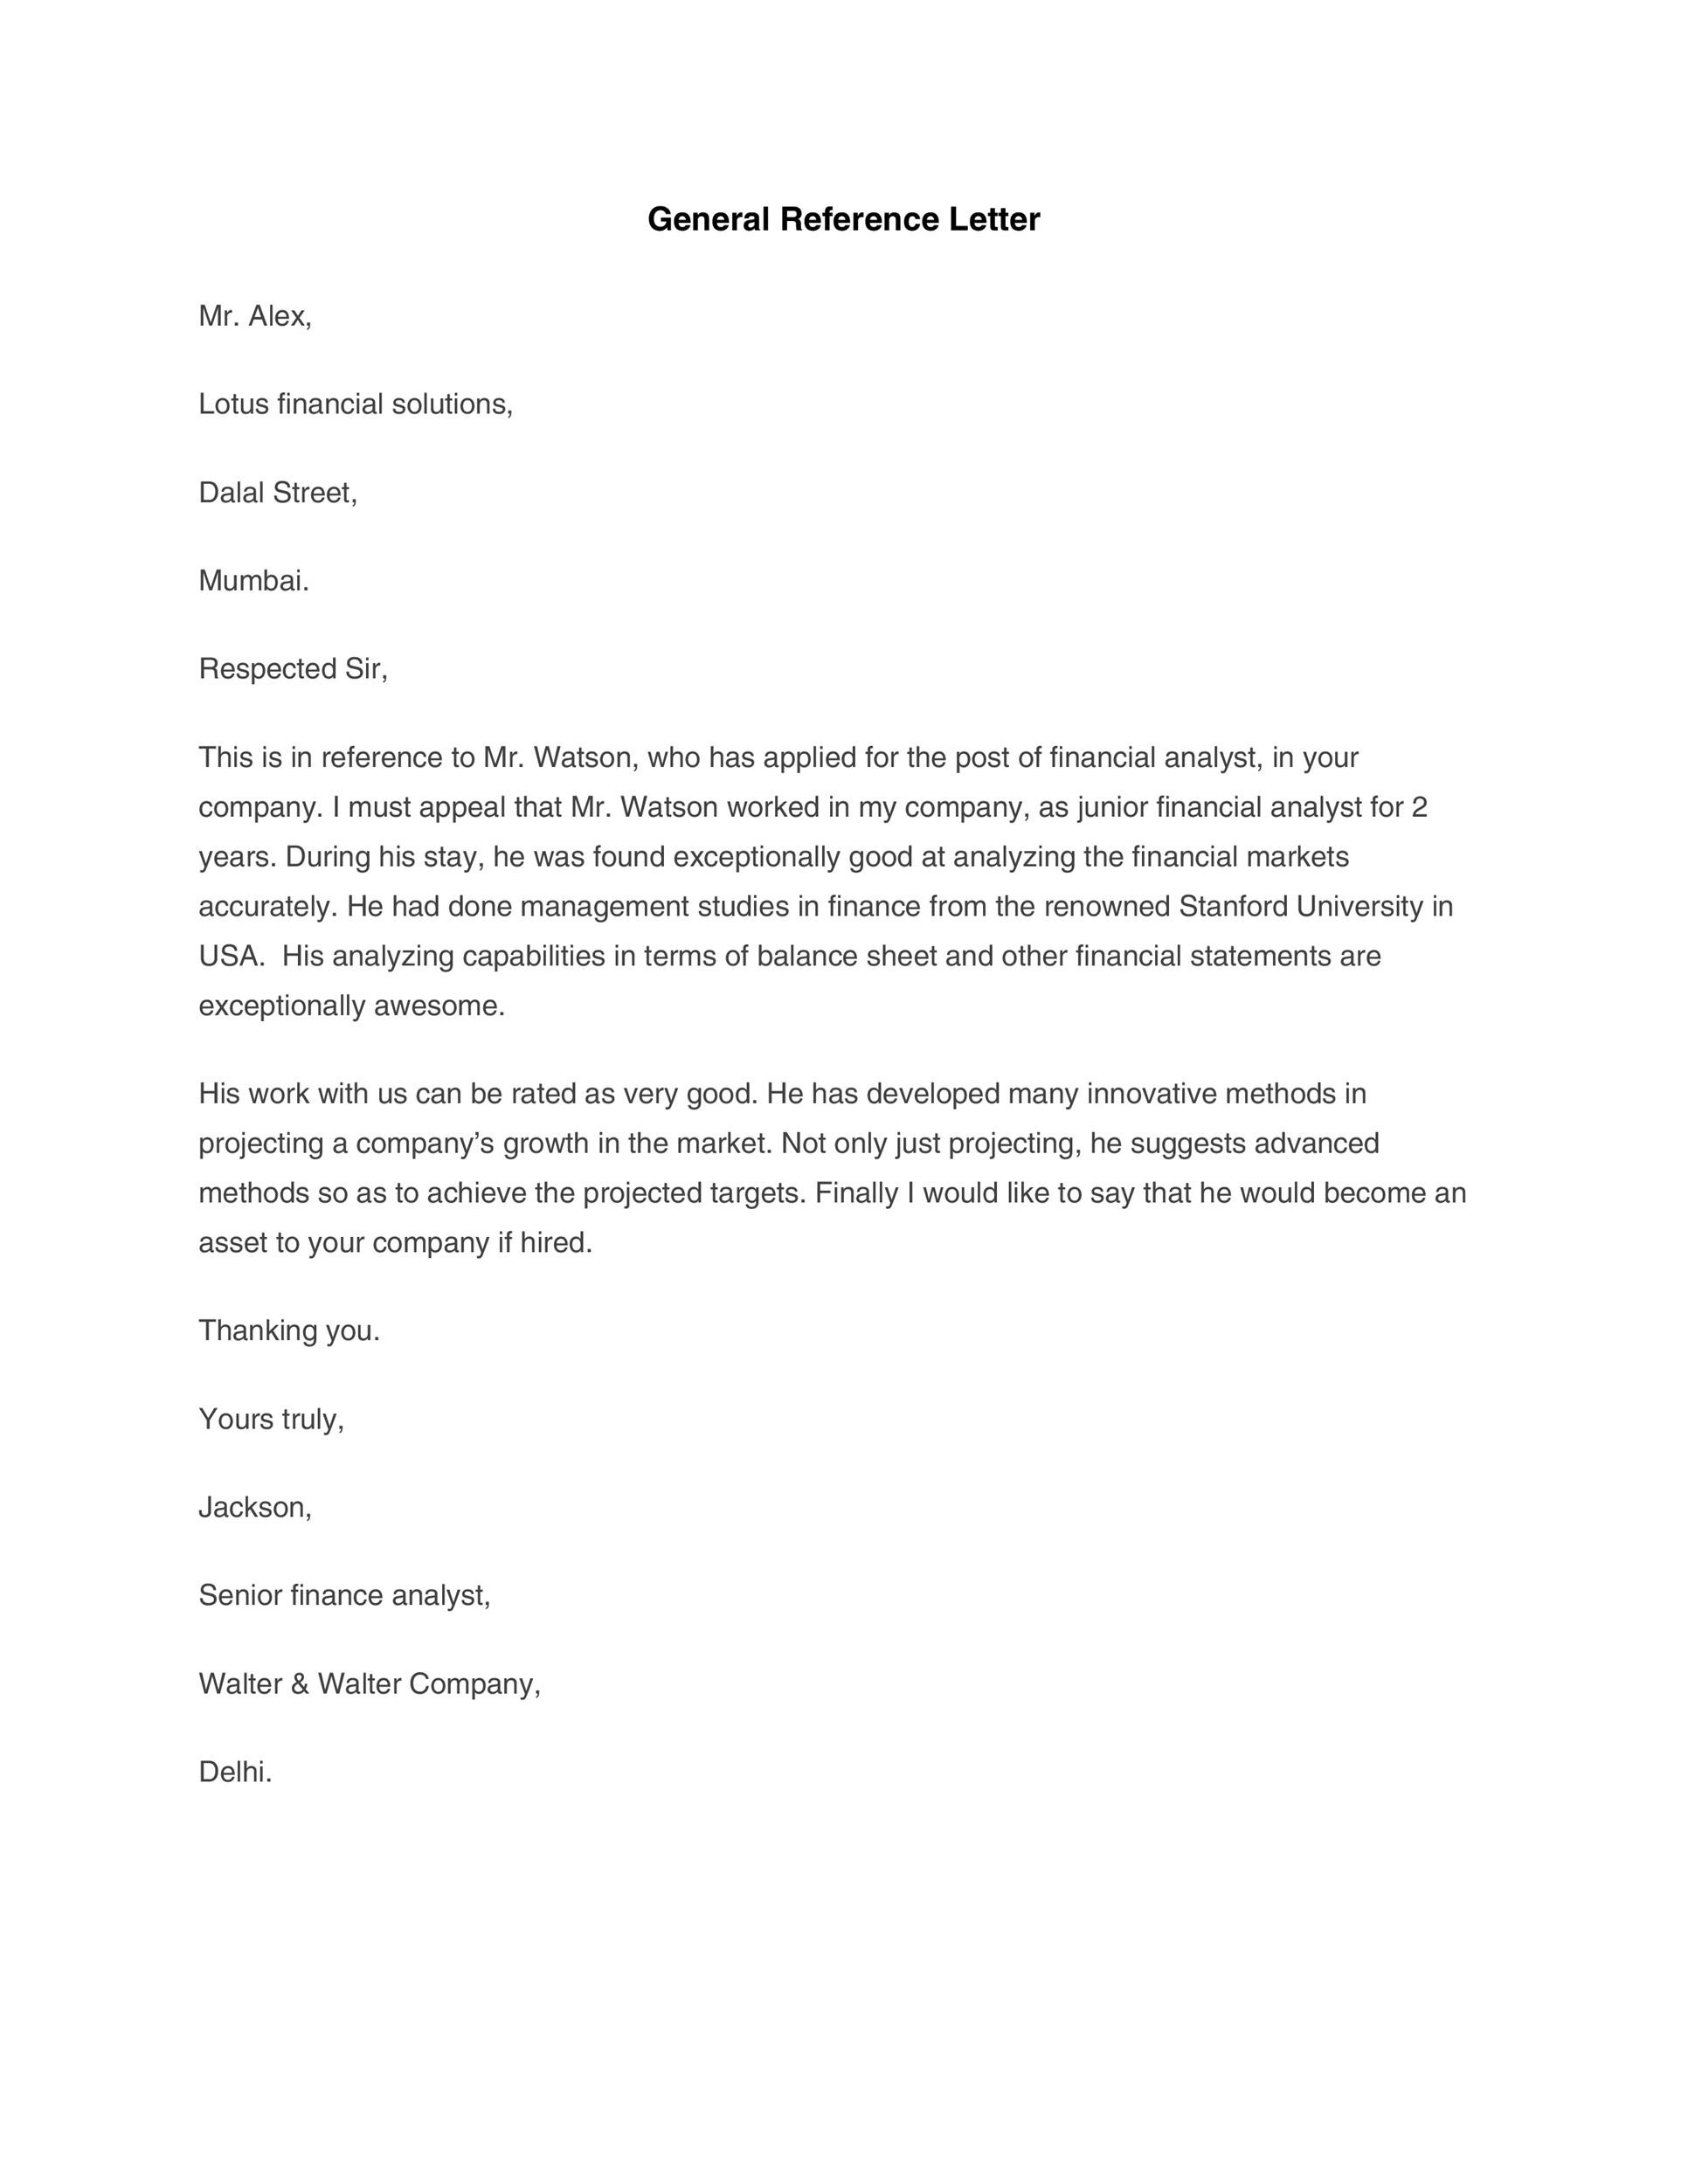 Letter Of Reference From Landlord from templatelab.com